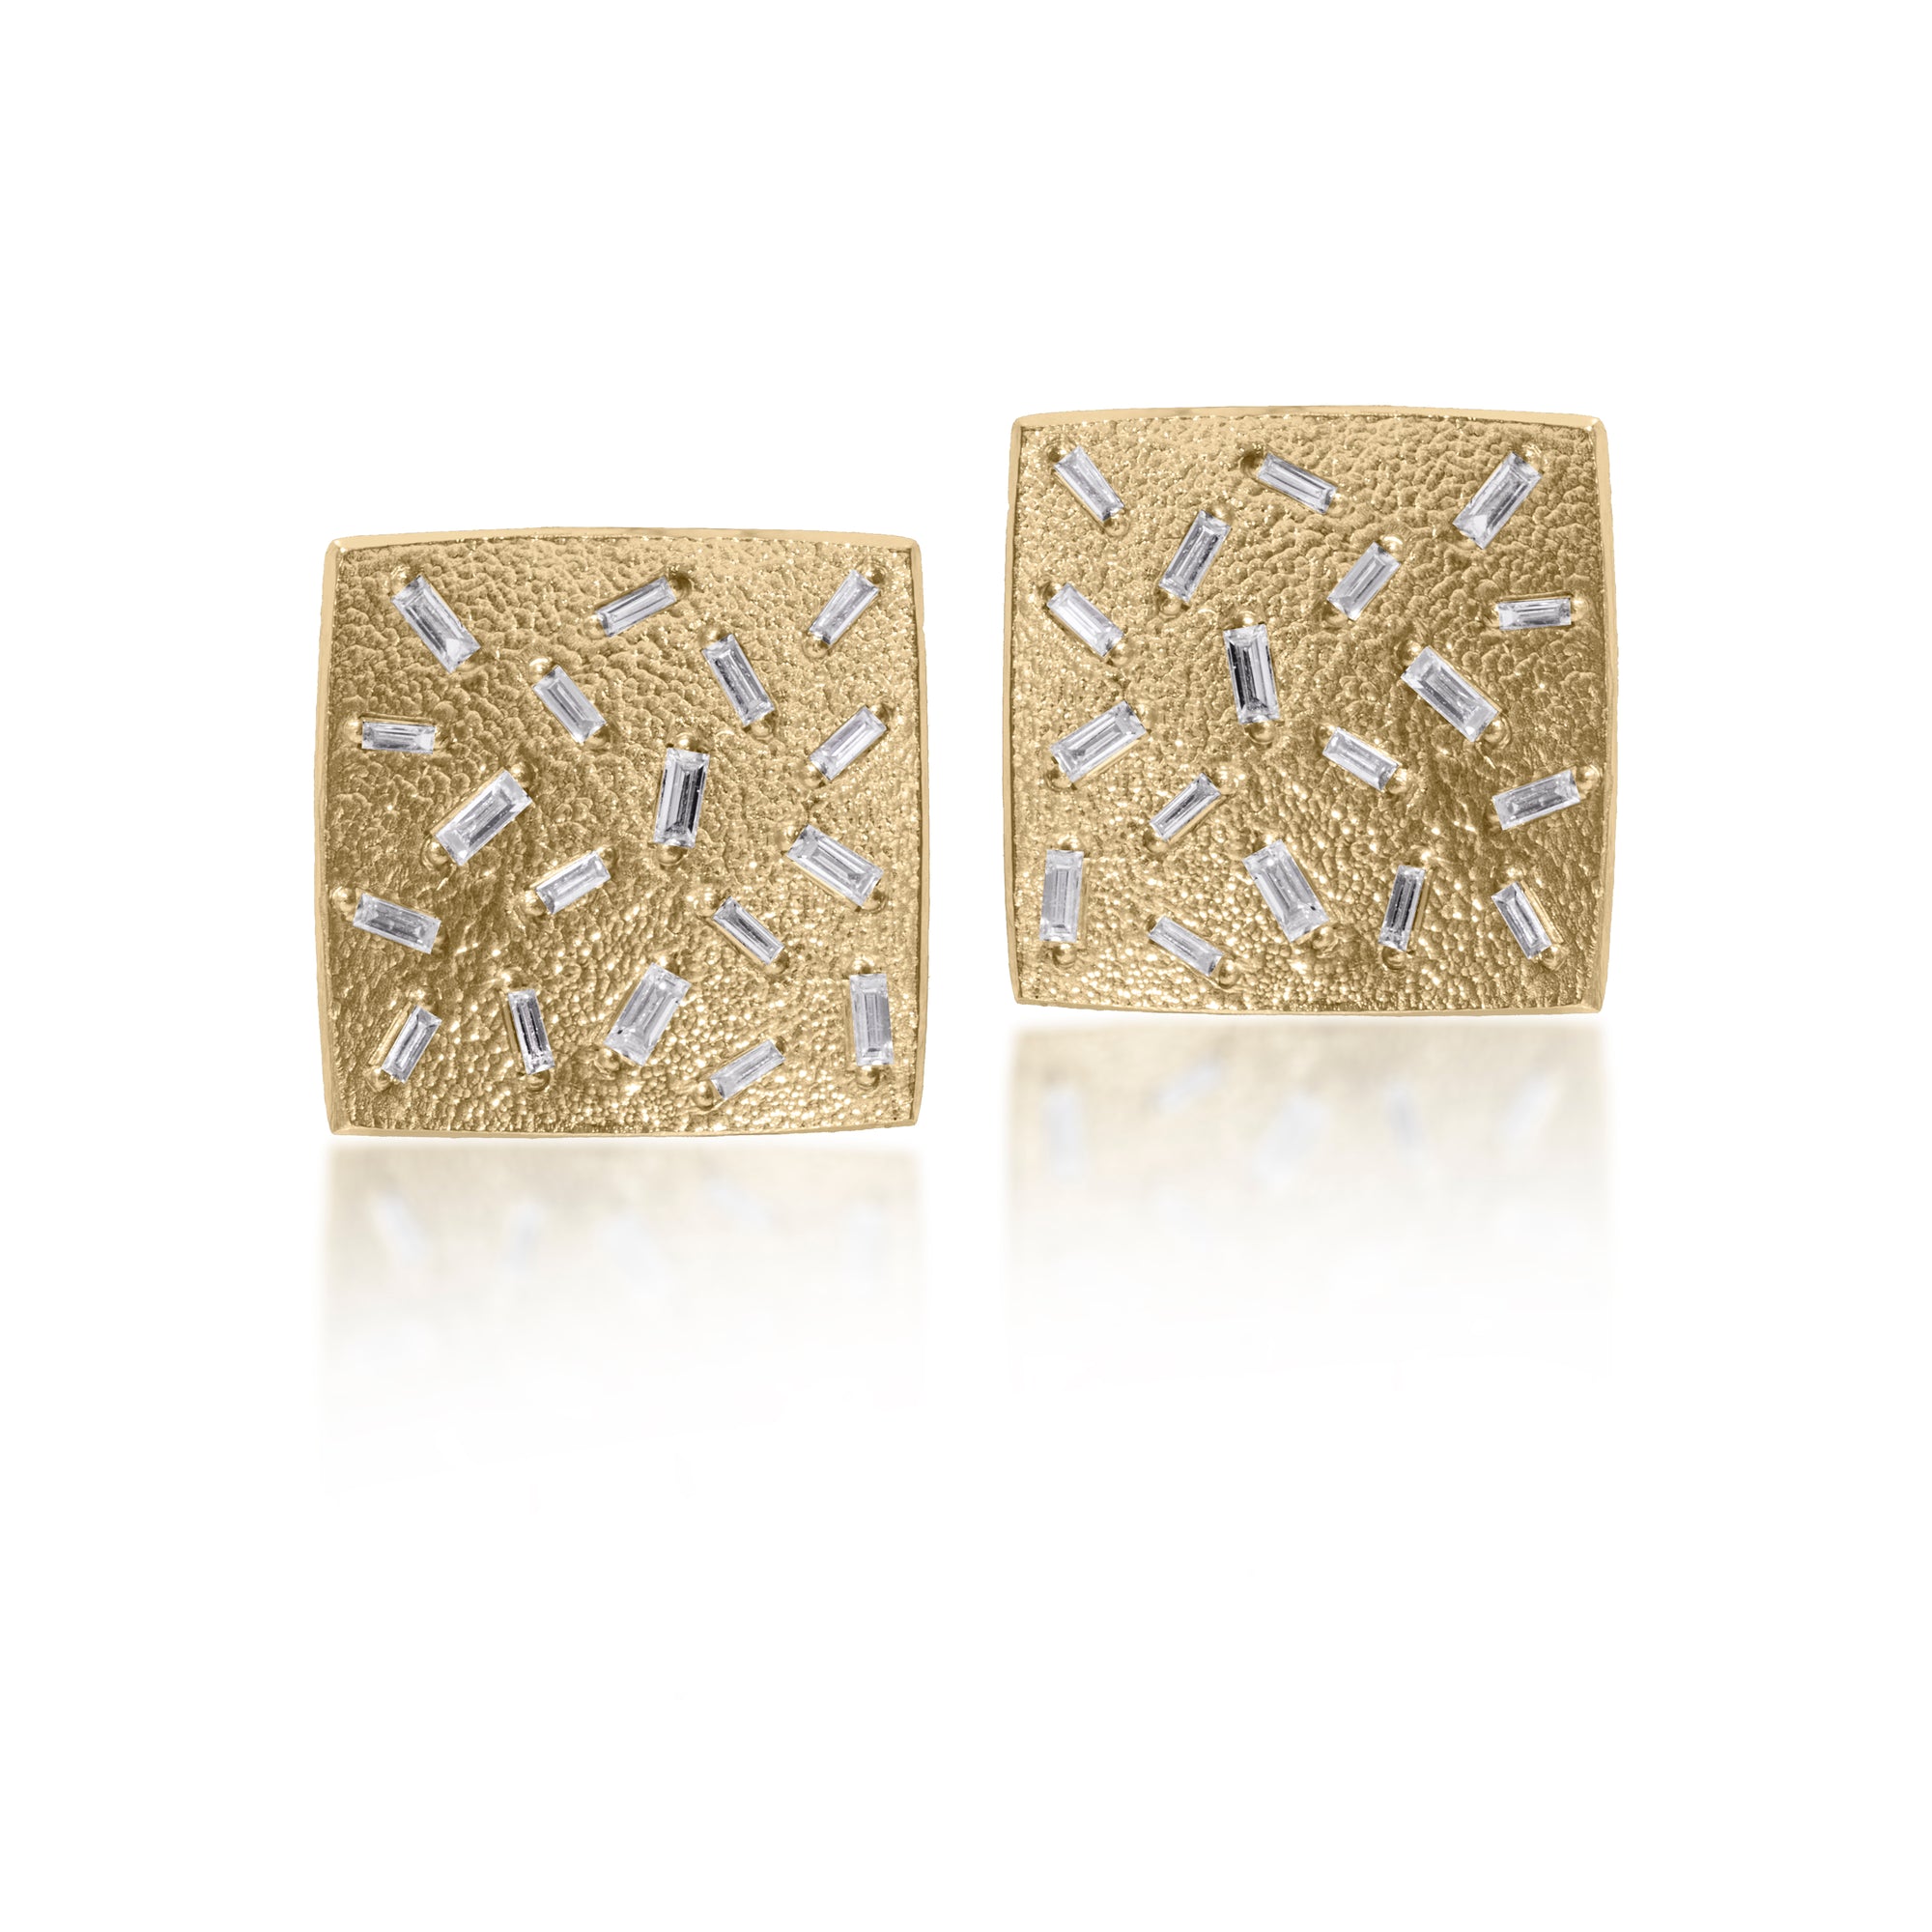 This simple but dramatic post earring is perfect for everyday or a fabulous night out.  Offered in three richly textured color ways, oxidized sterling, 18k gold, palladium.  Each earring set with 18 white diamond baguettes.   0.972 tcw.